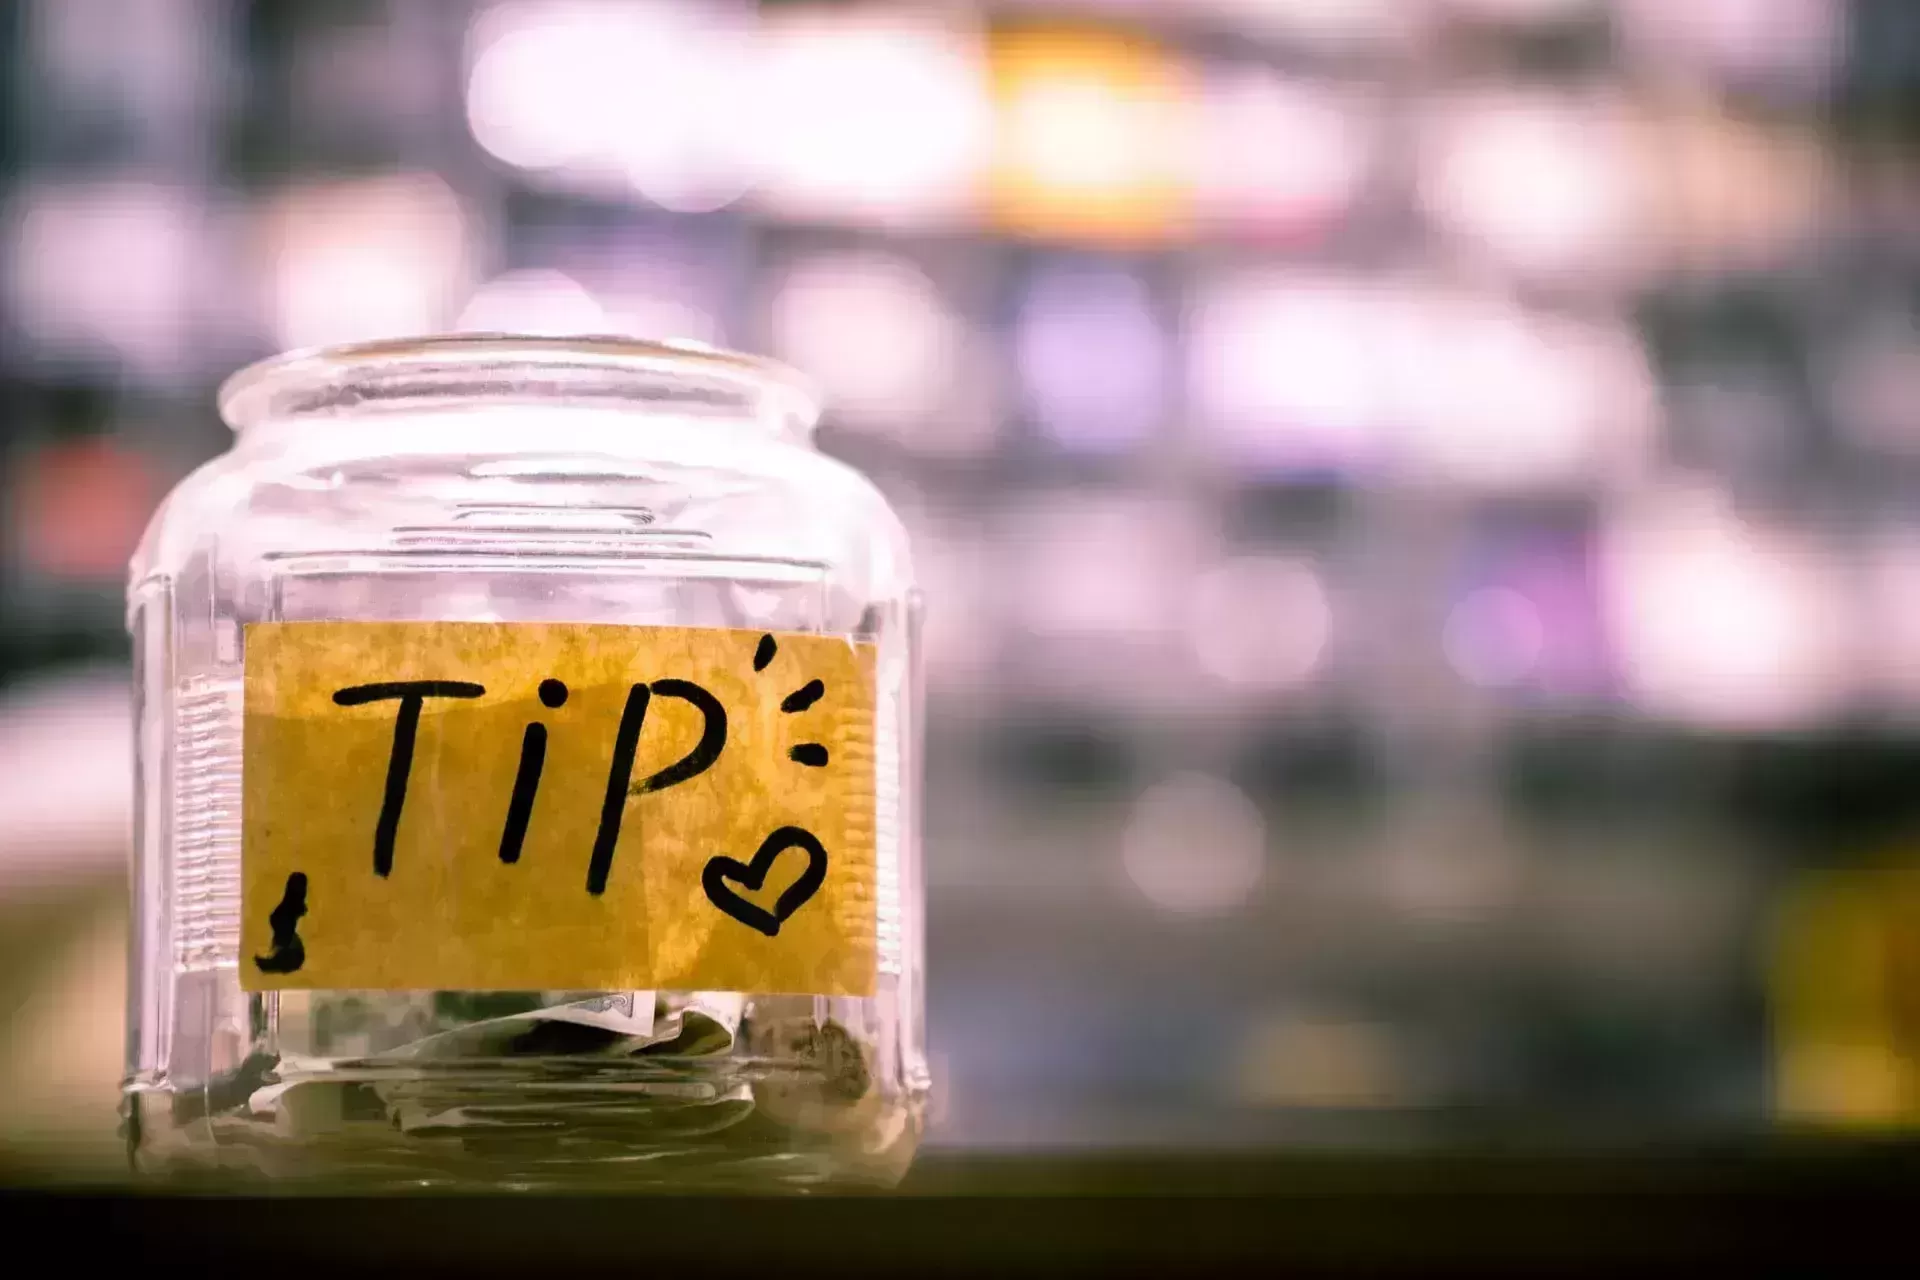 Restaurants cant force customers to tip: CCPA